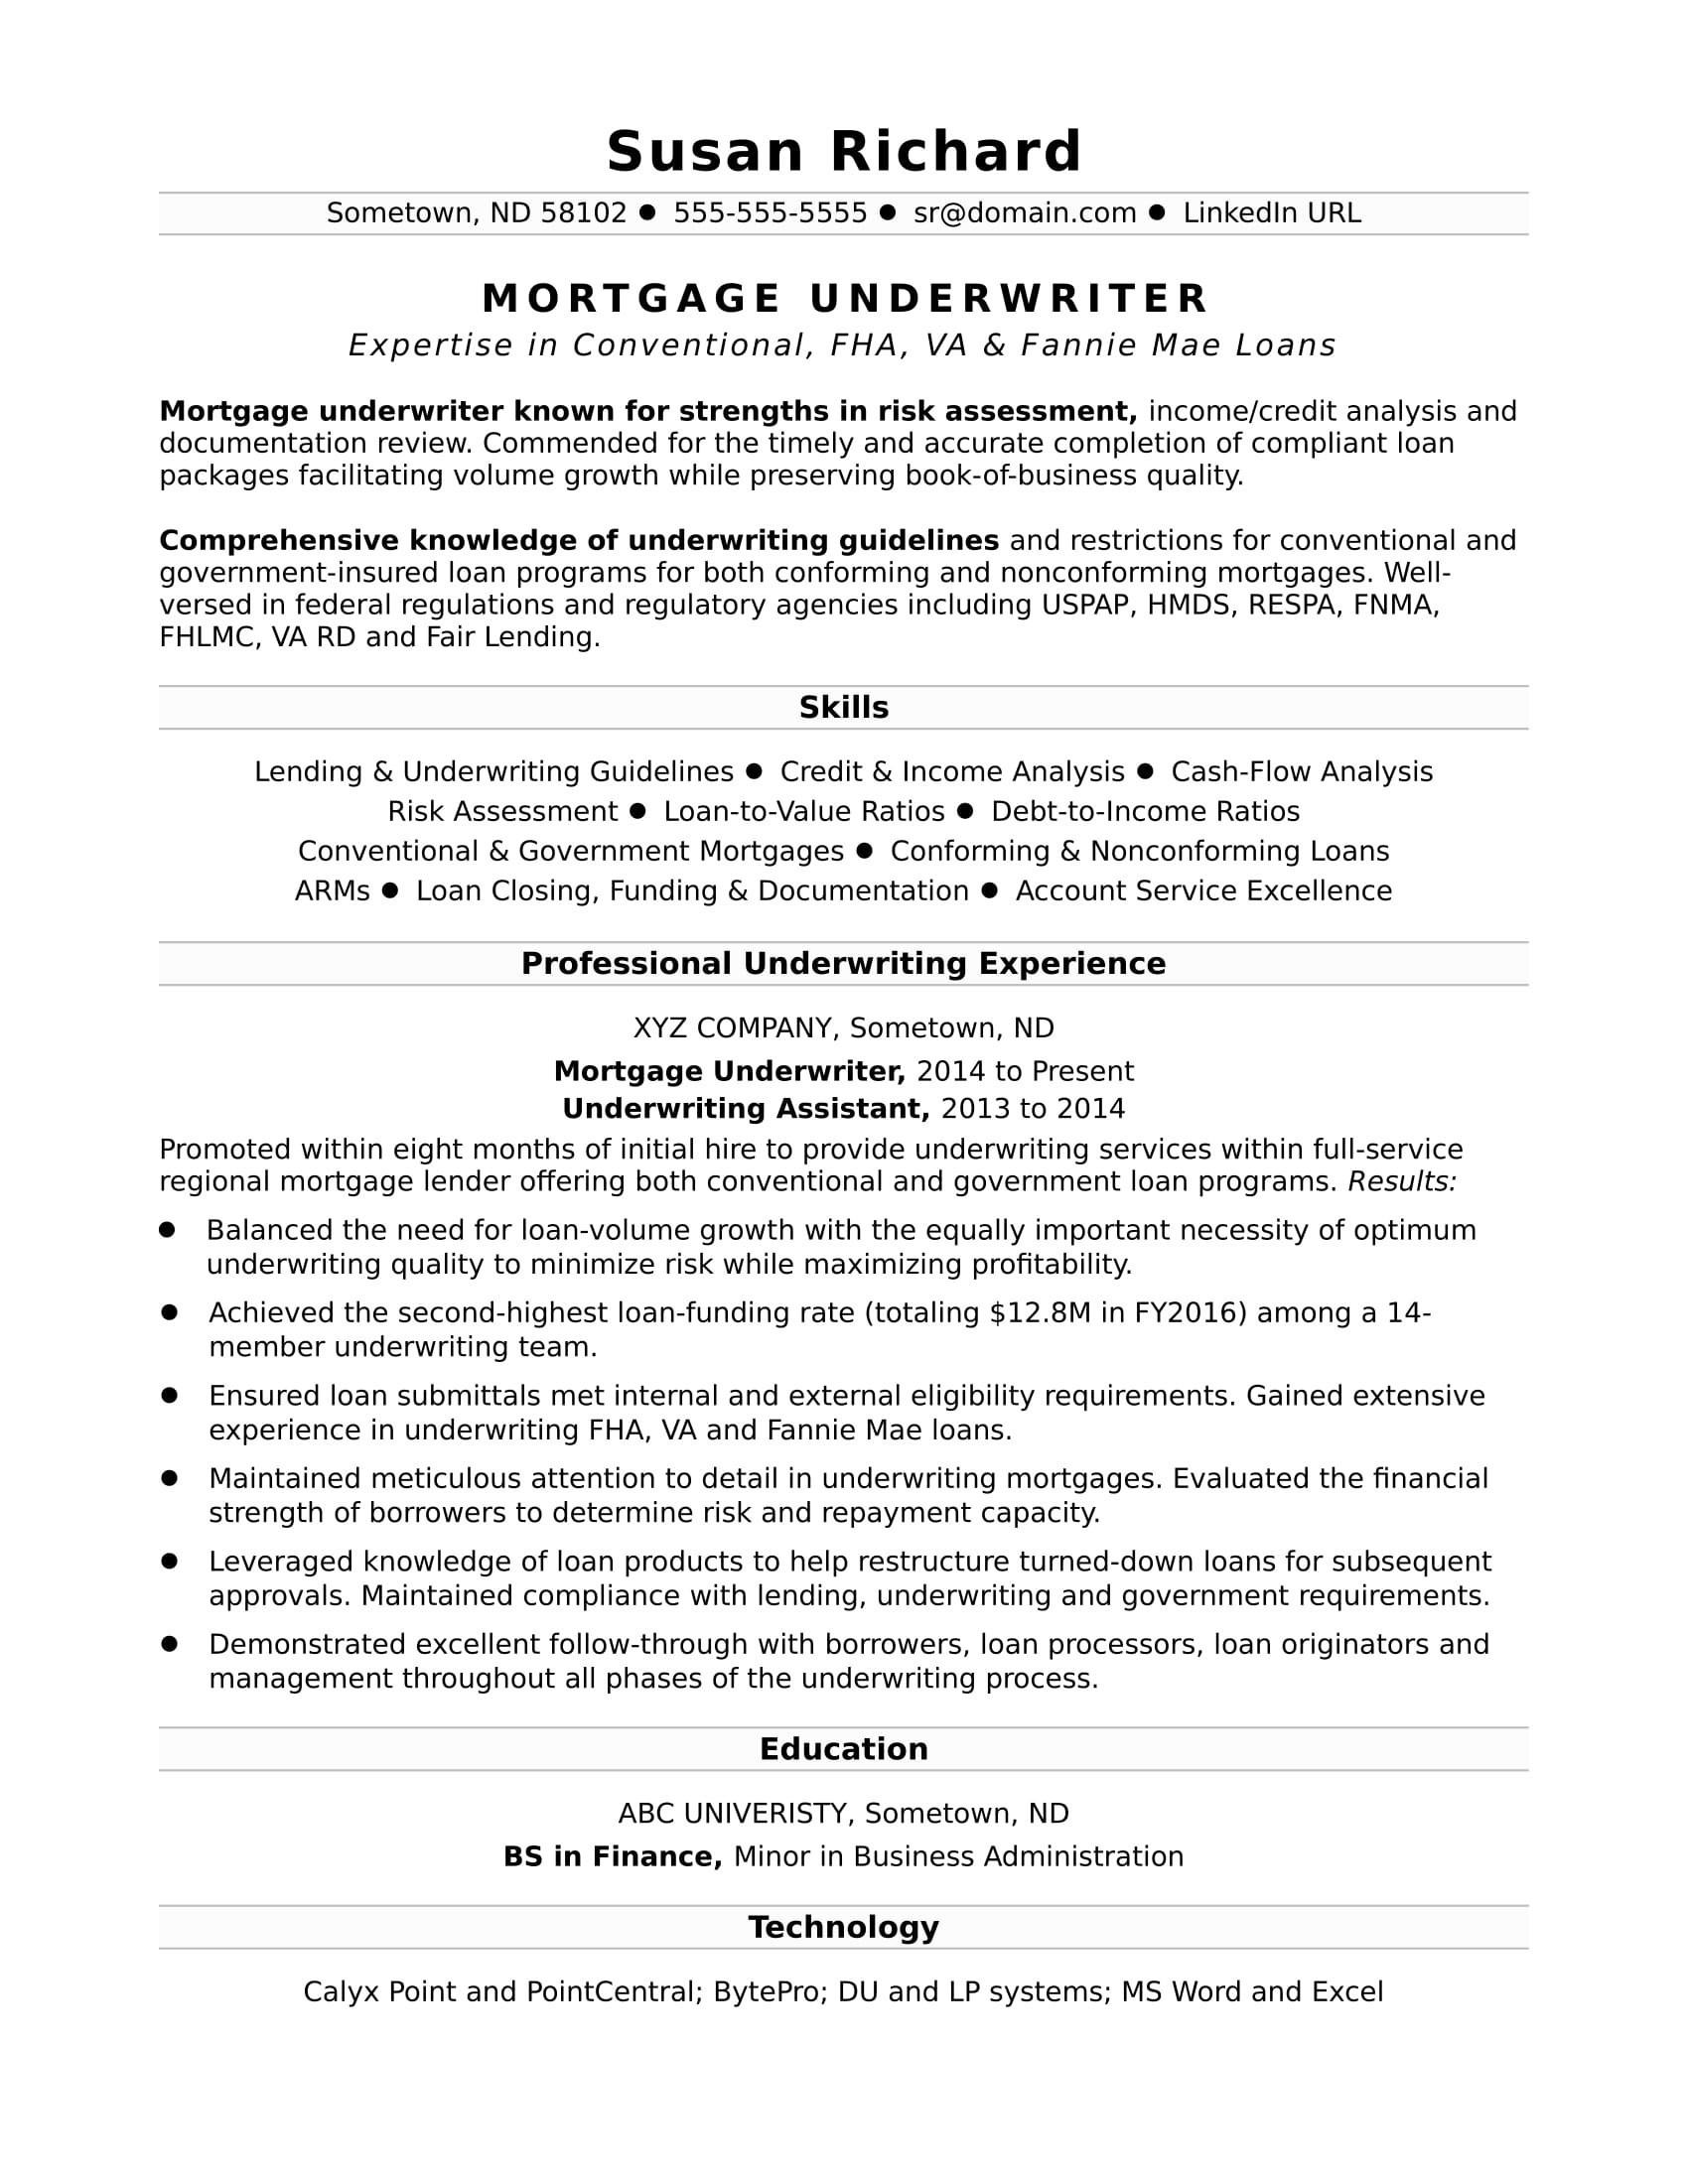 free cover letter design template example-Free Resume Search In India Unique New Programmer Resume Lovely Resume Cover Letter formatted Resume 0d 4-c